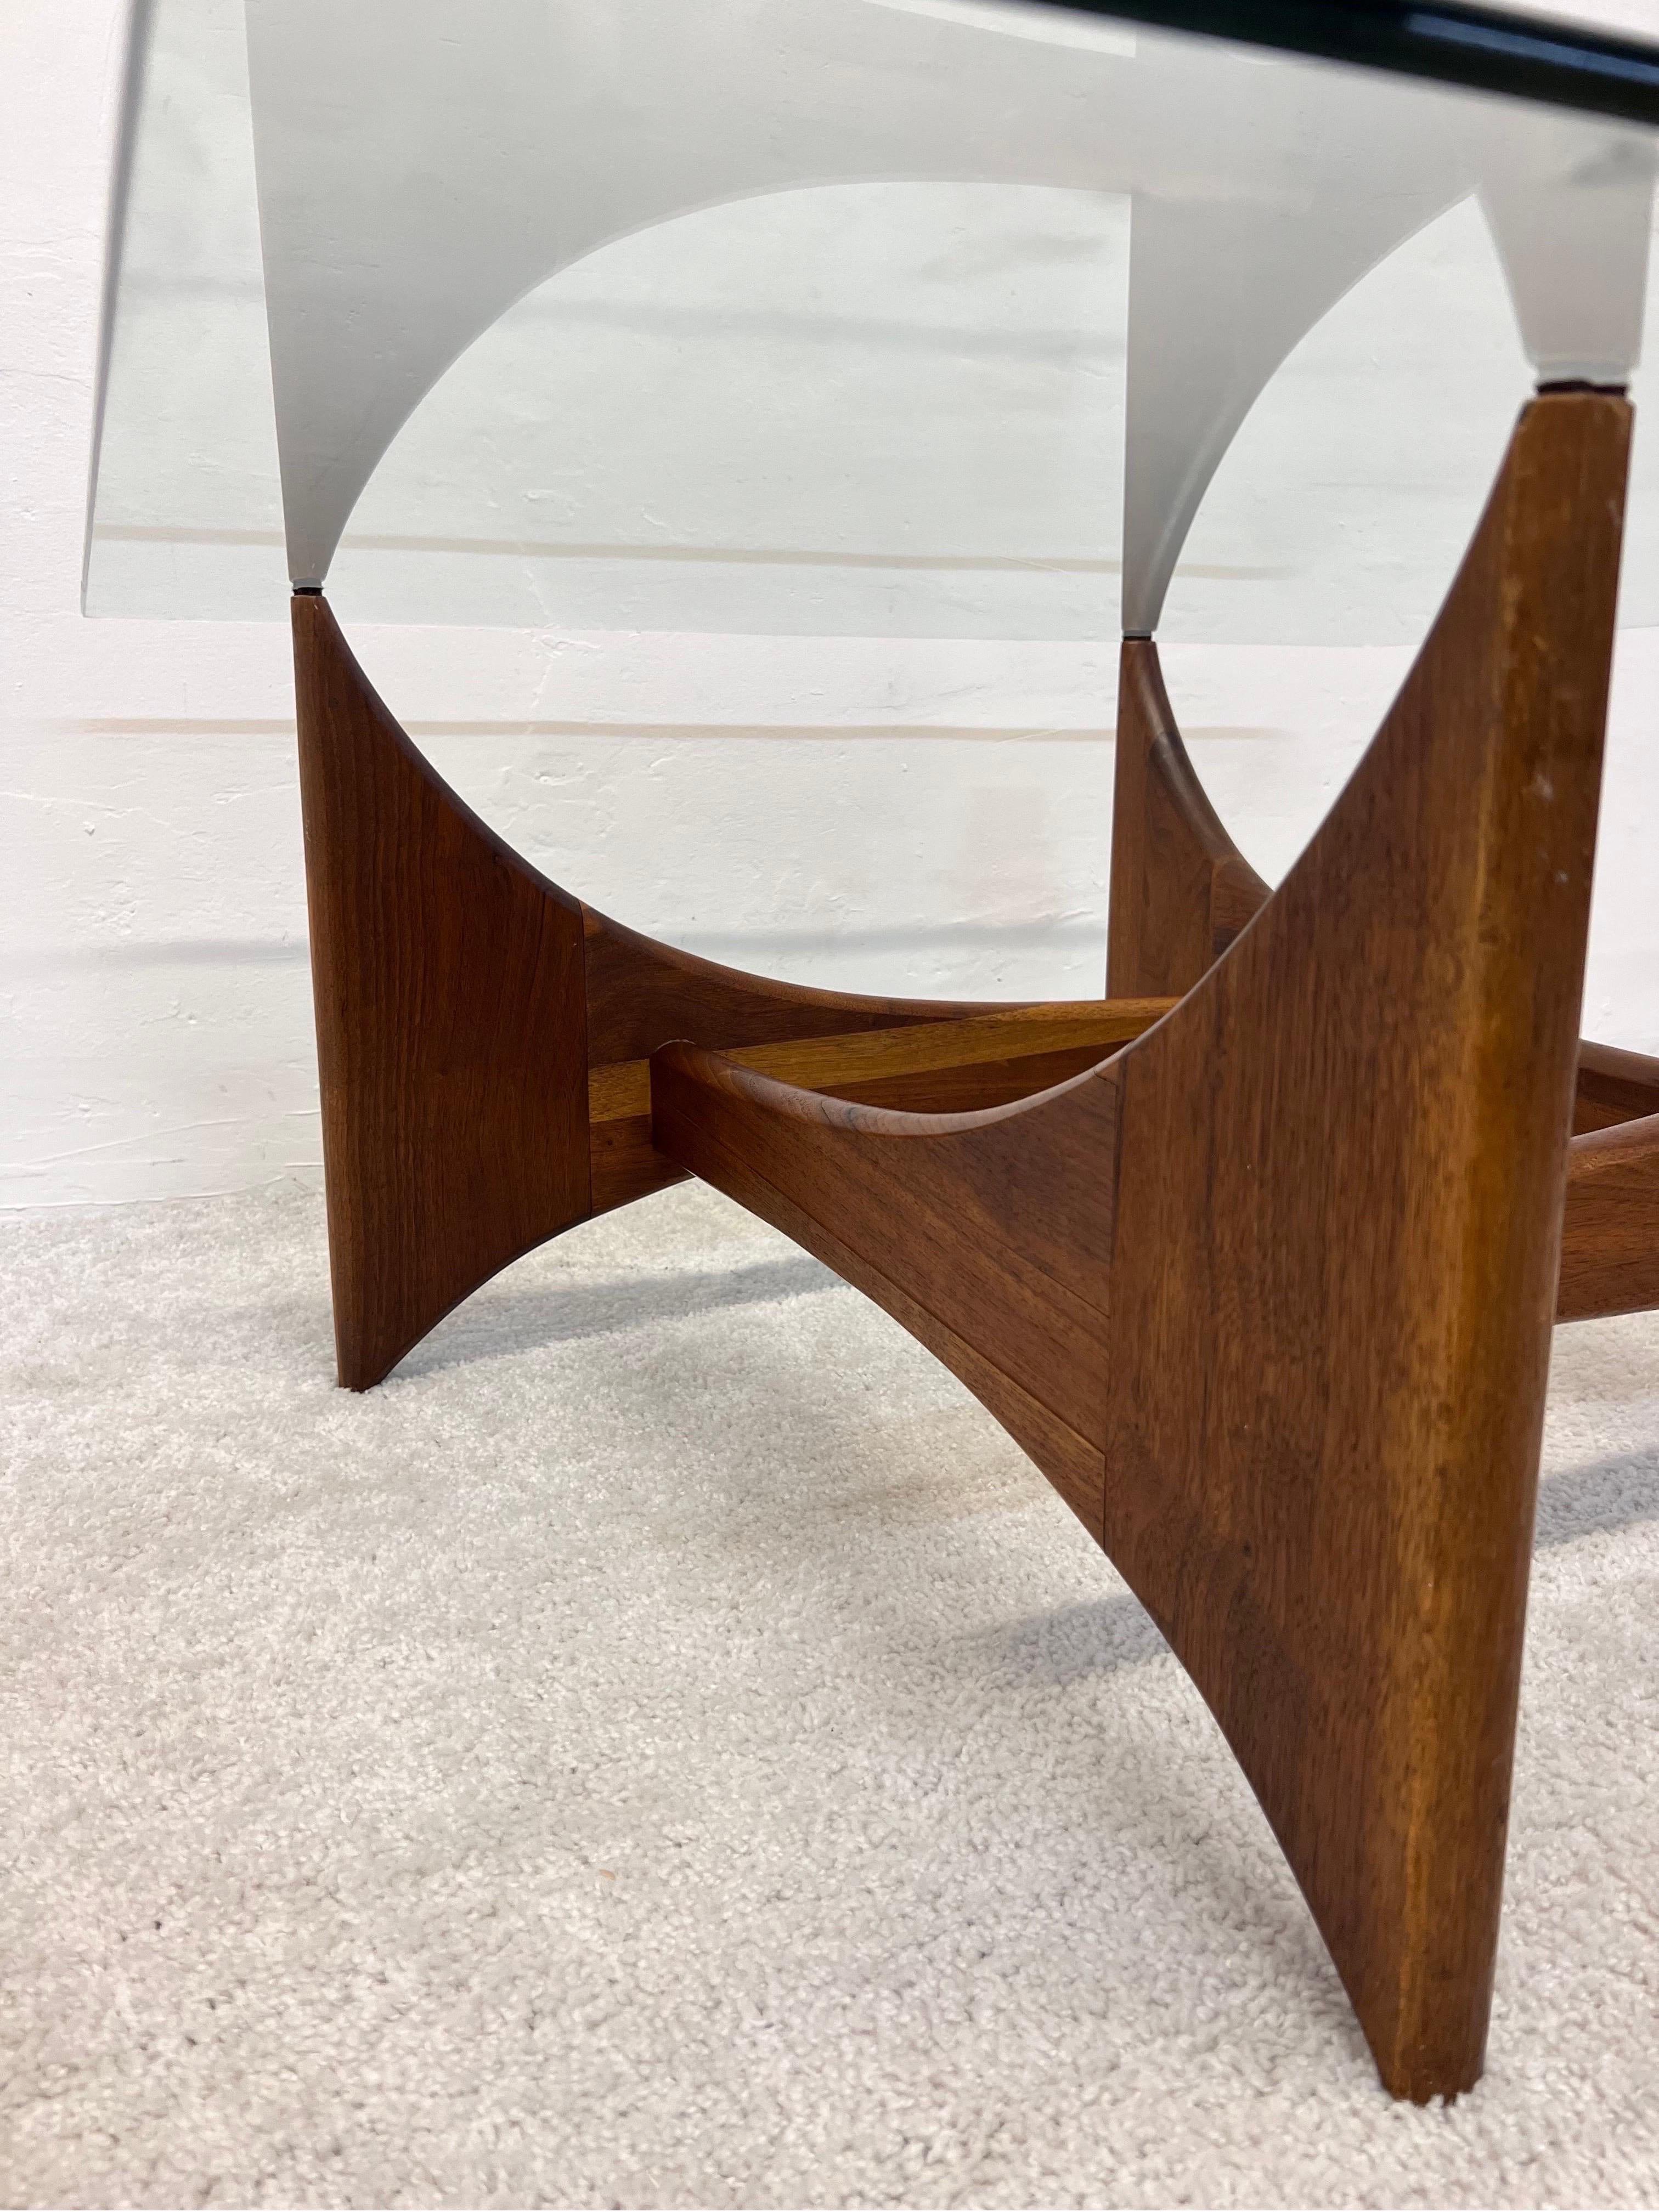 American Modern Walnut and Glass Coffee or Cocktail Table by Adrian Pearsall For Sale 1